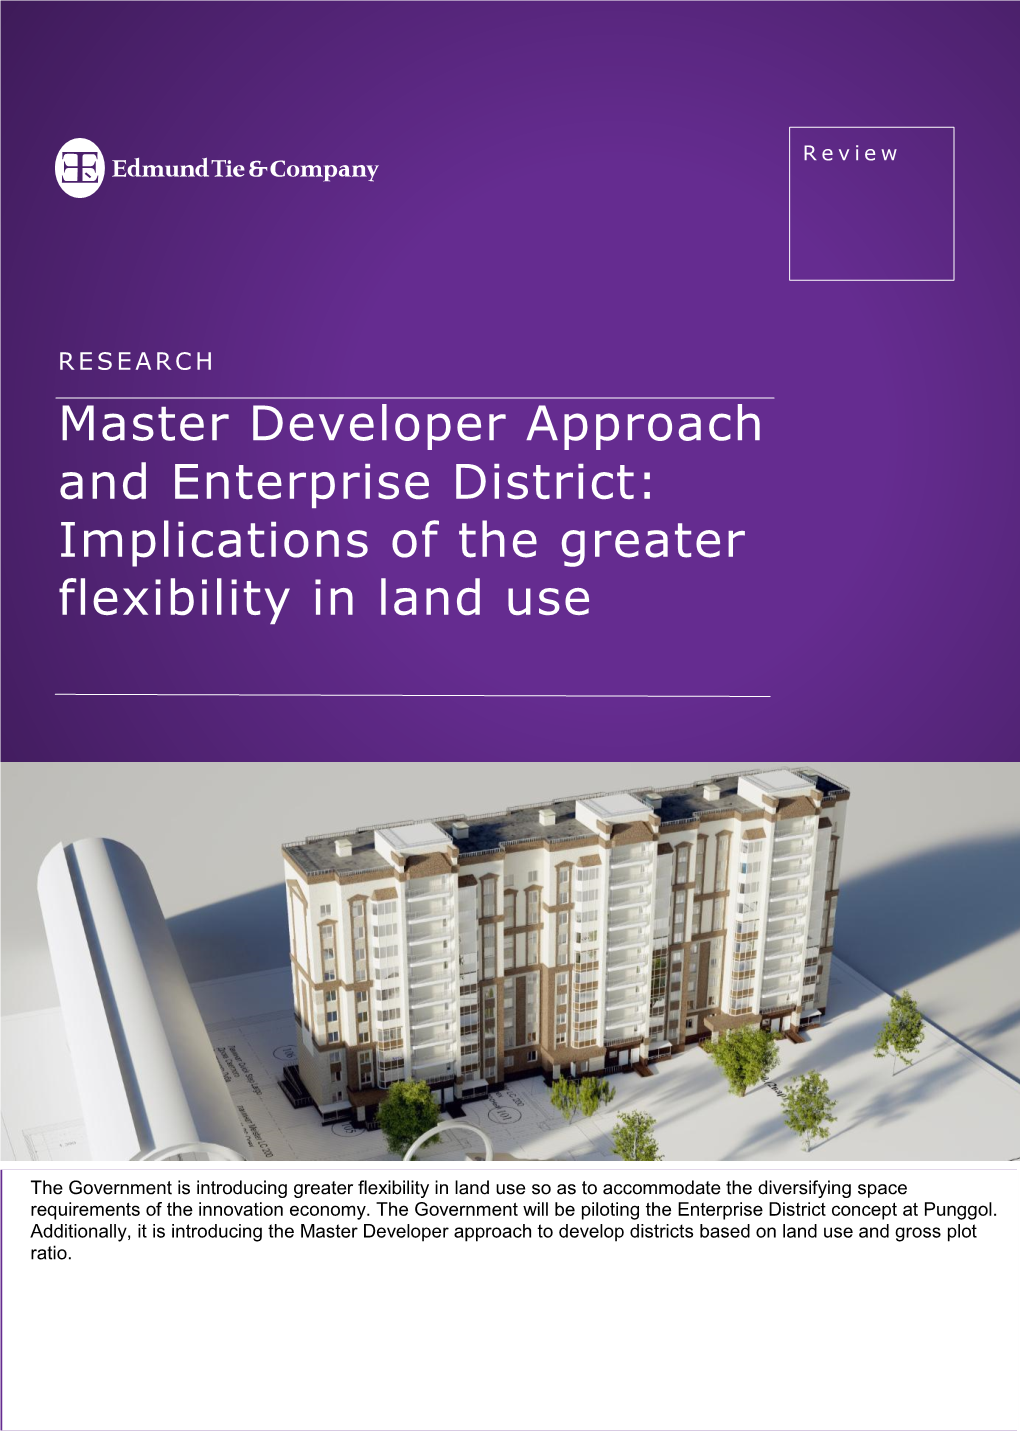 Master Developer Approach and Enterprise District: Implications of the Greater Flexibility in Land Use